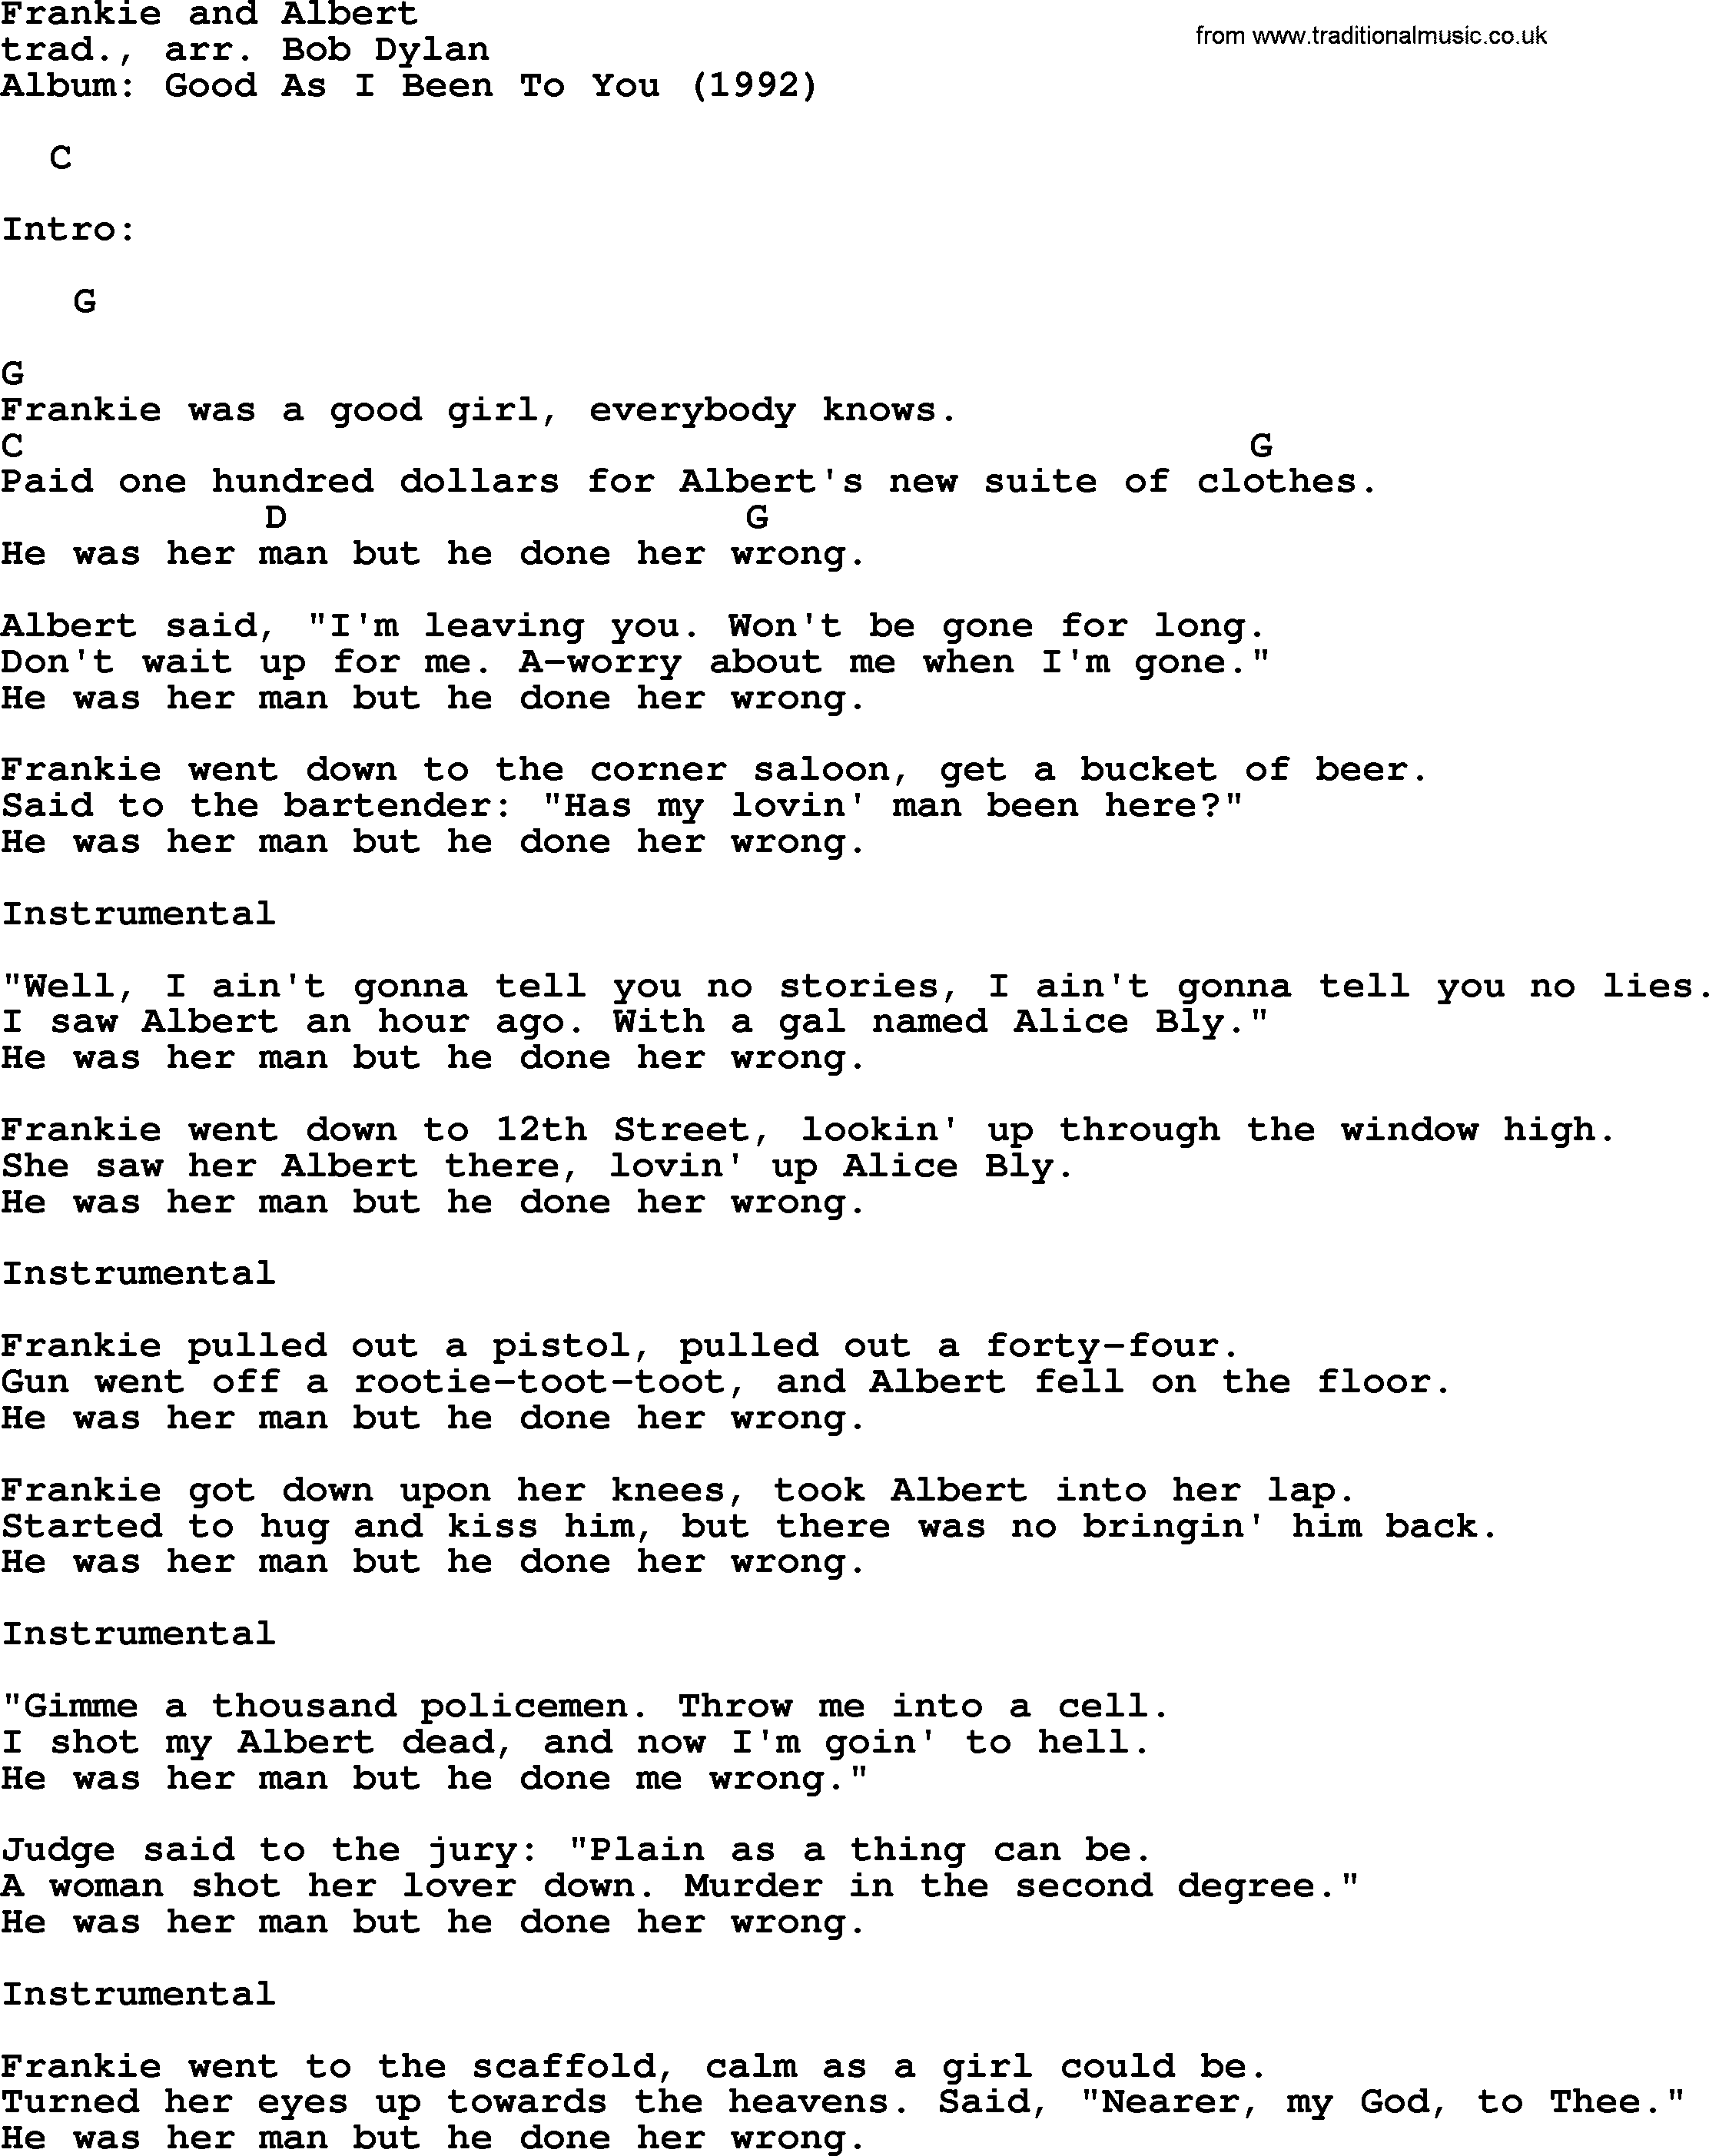 Bob Dylan song, lyrics with chords - Frankie and Albert